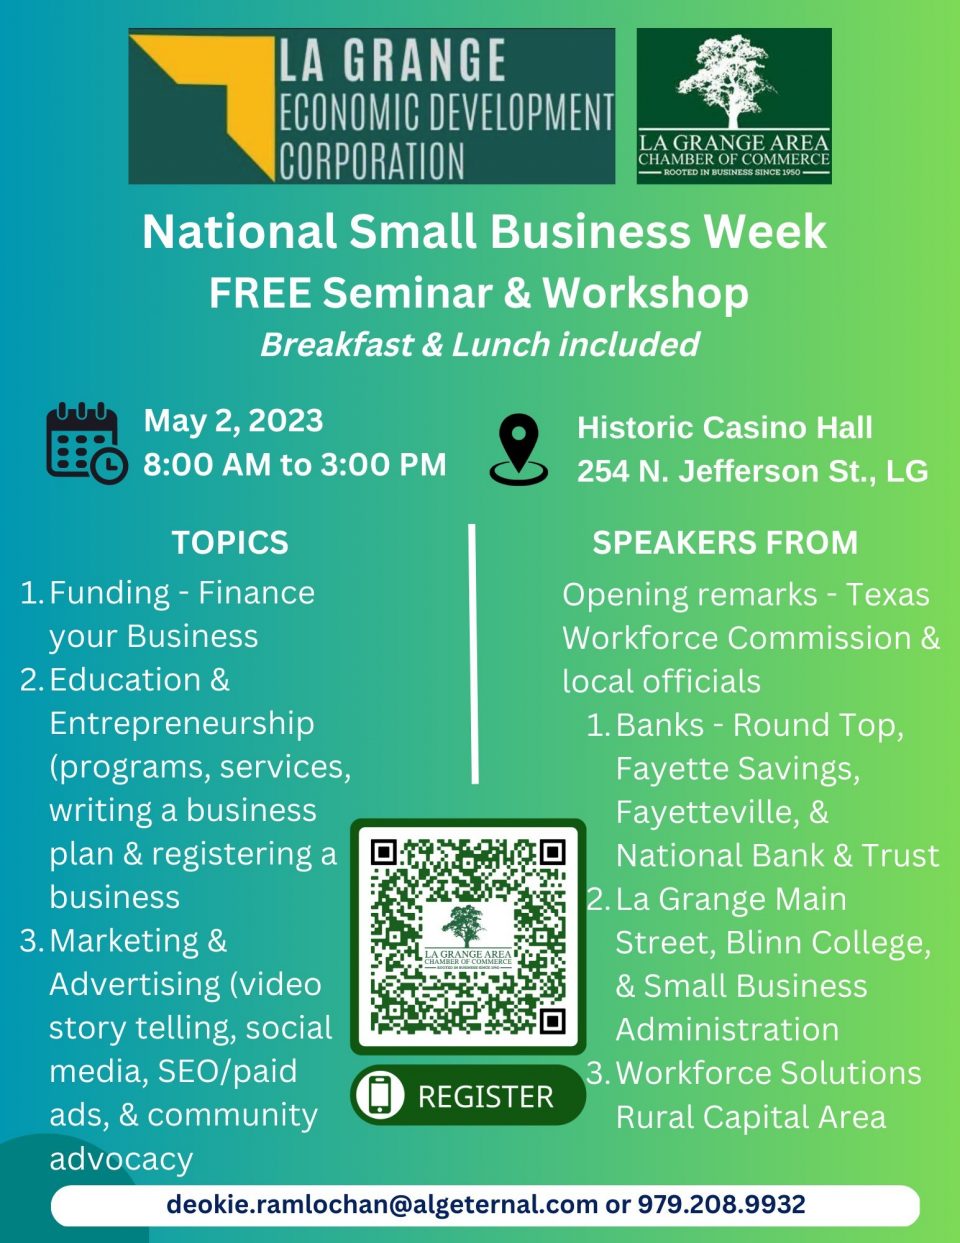 Attend a Free Seminar/Workshop on May 2 to Celebrate National Small Business Week